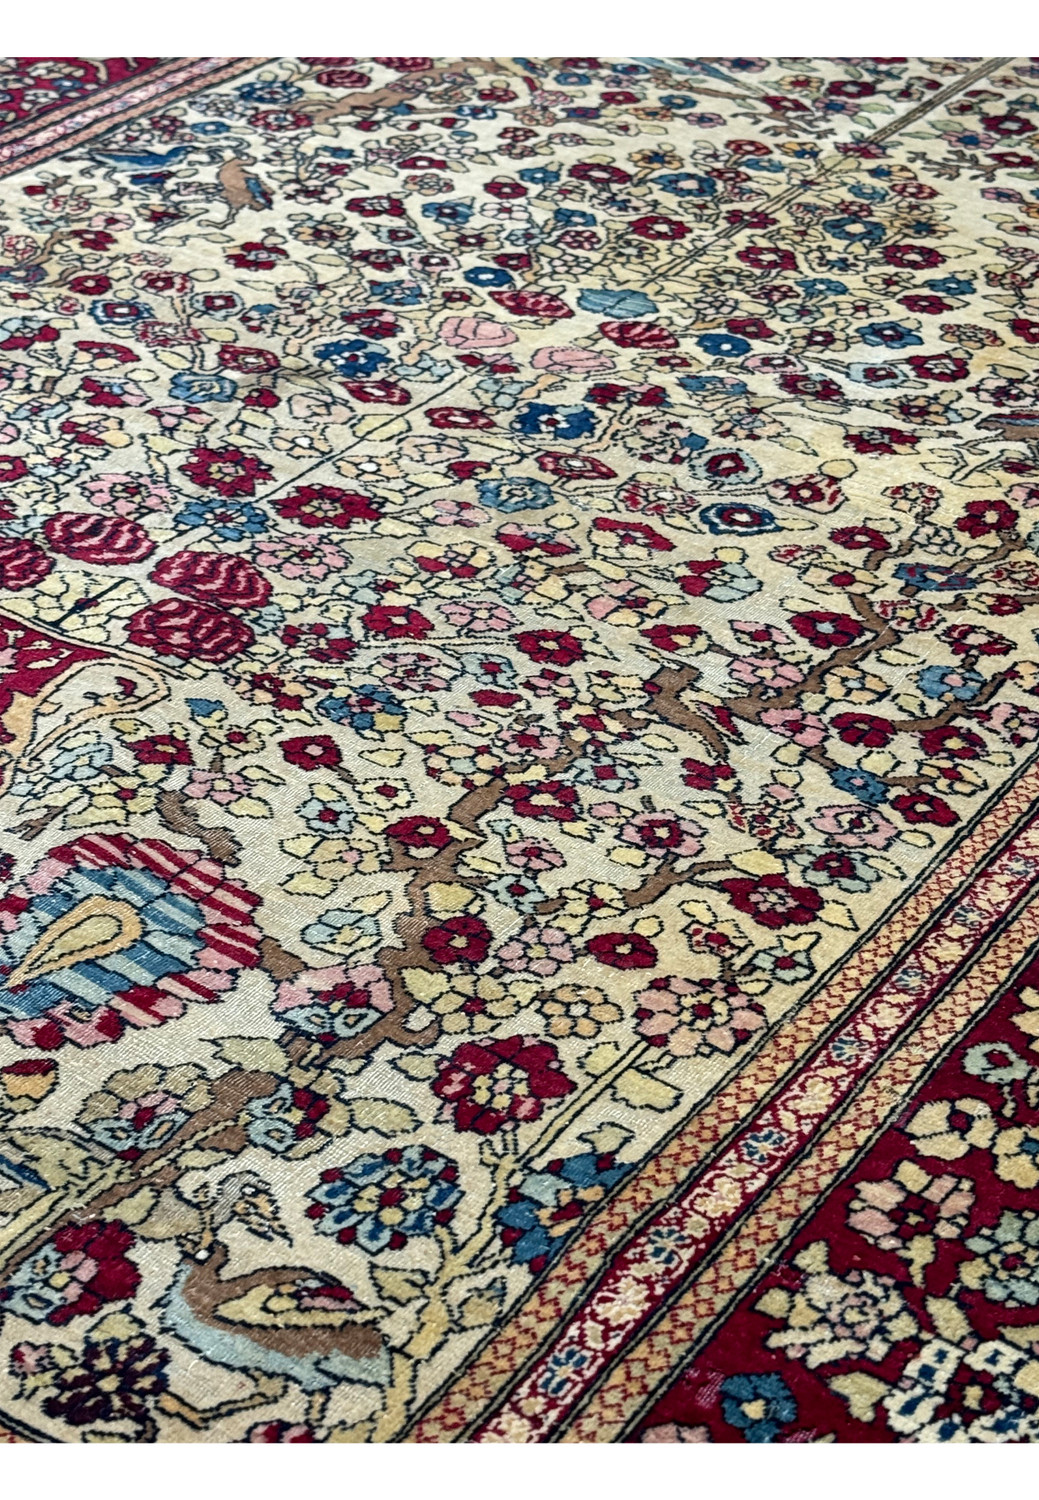 A side view of the rug, focusing on the edge to show the rug's thickness and the quality of its weave.